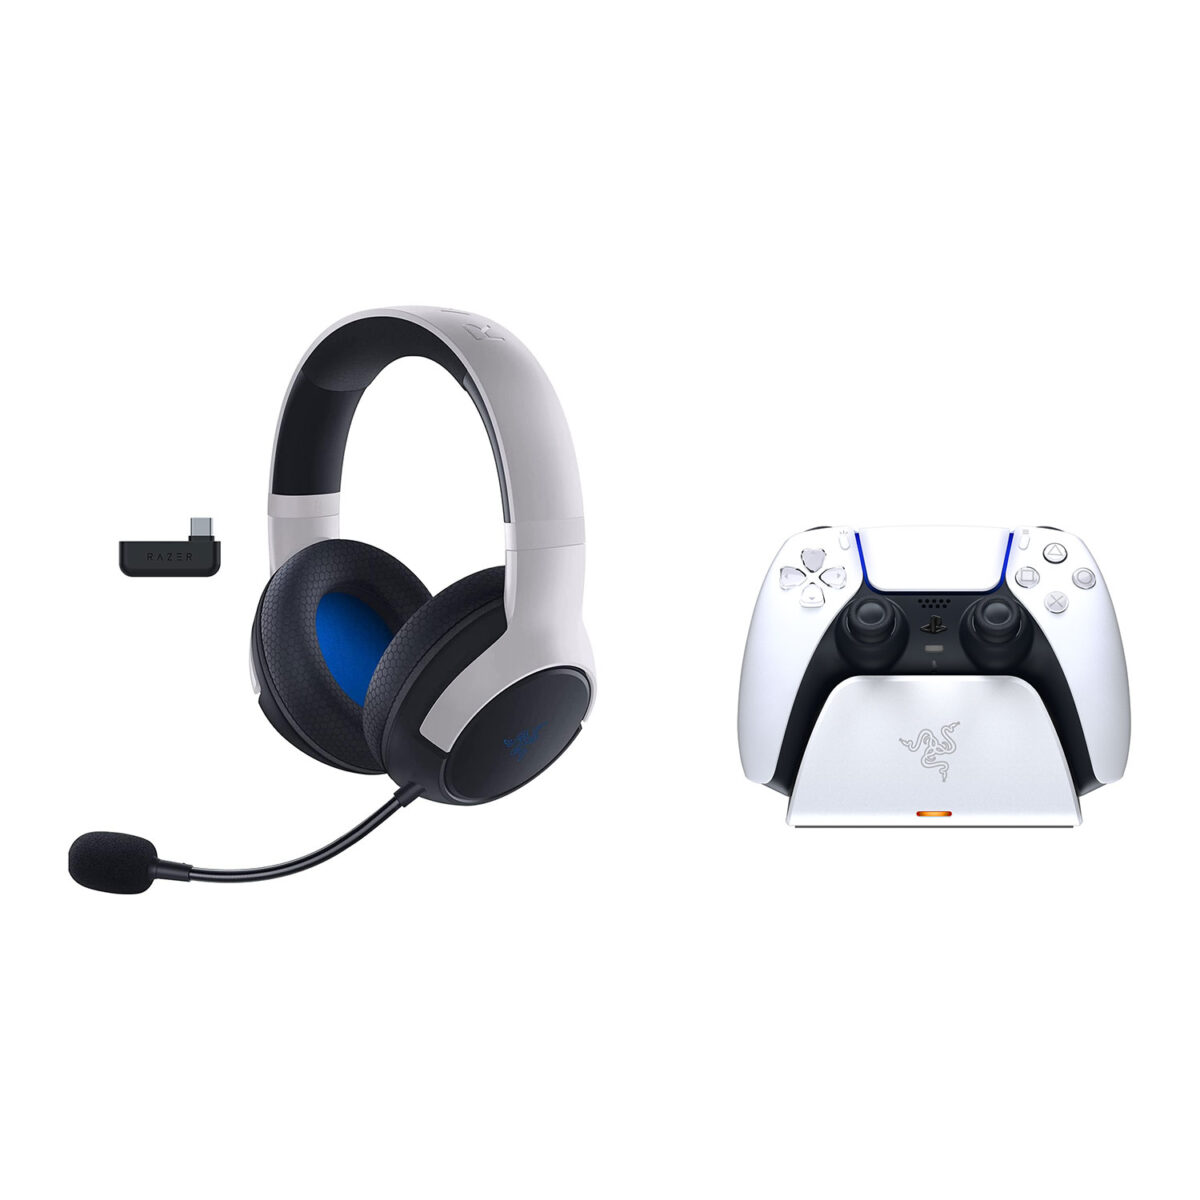 Razer Legendary Duo Bundle for PlayStation - Kaira Wireless Headset and Quick Charging Stand for PS5 - Razer 1.28.80.26.263